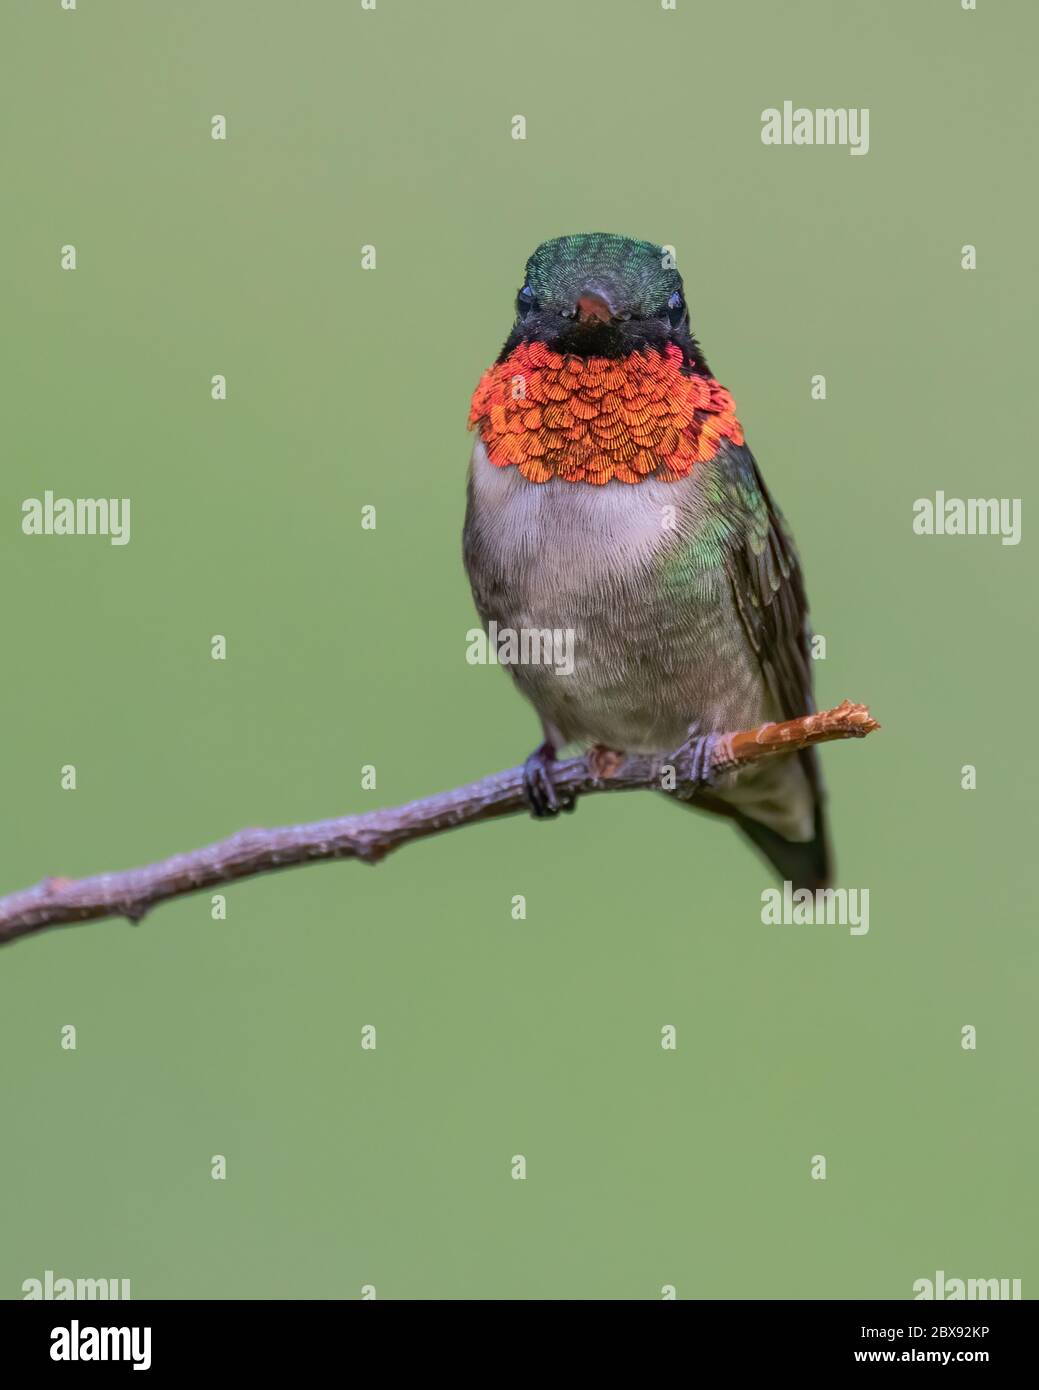 A ruby-throated hummingbird perched. Stock Photo